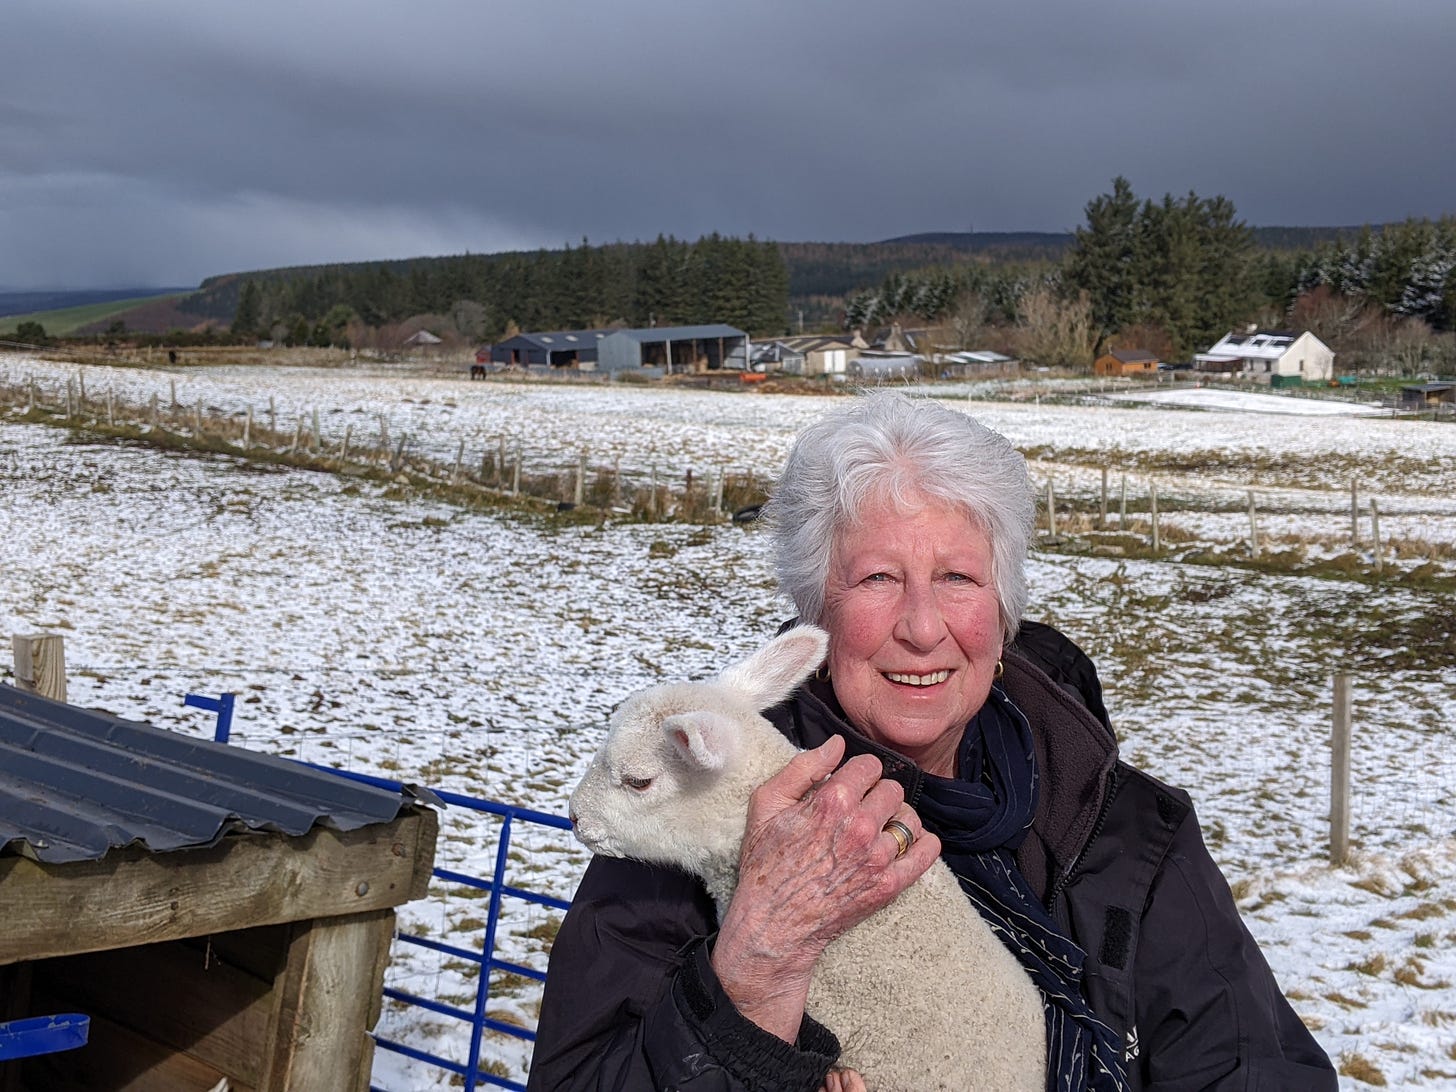 Dee, holding a week old lamb, in a snowy hillside with trees in the distance